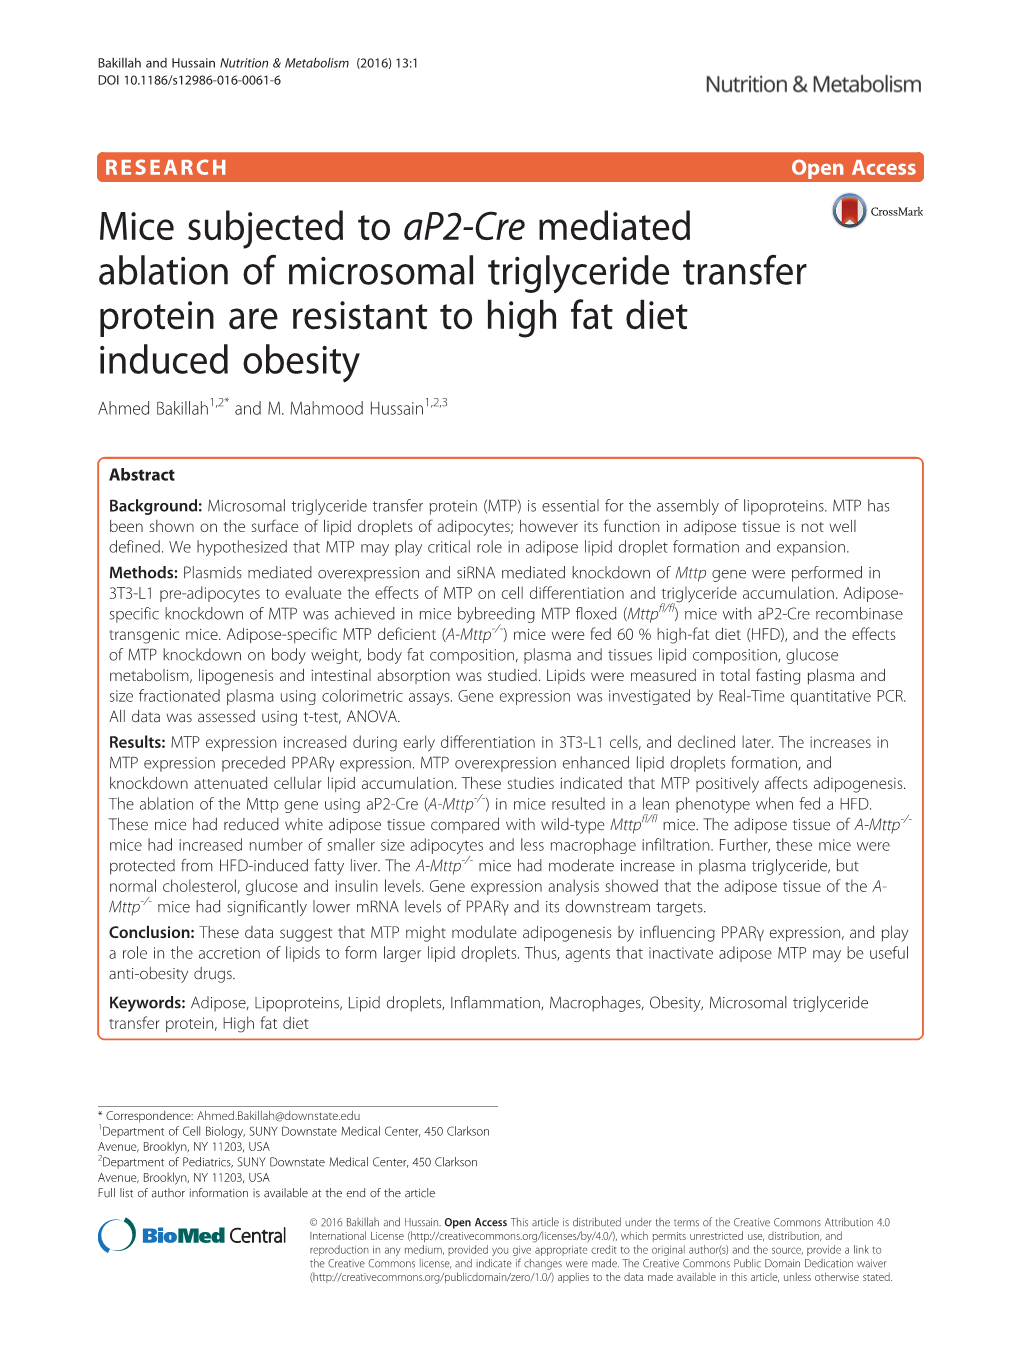 Mice Subjected to Ap2-Cre Mediated Ablation of Microsomal Triglyceride Transfer Protein Are Resistant to High Fat Diet Induced Obesity Ahmed Bakillah1,2* and M